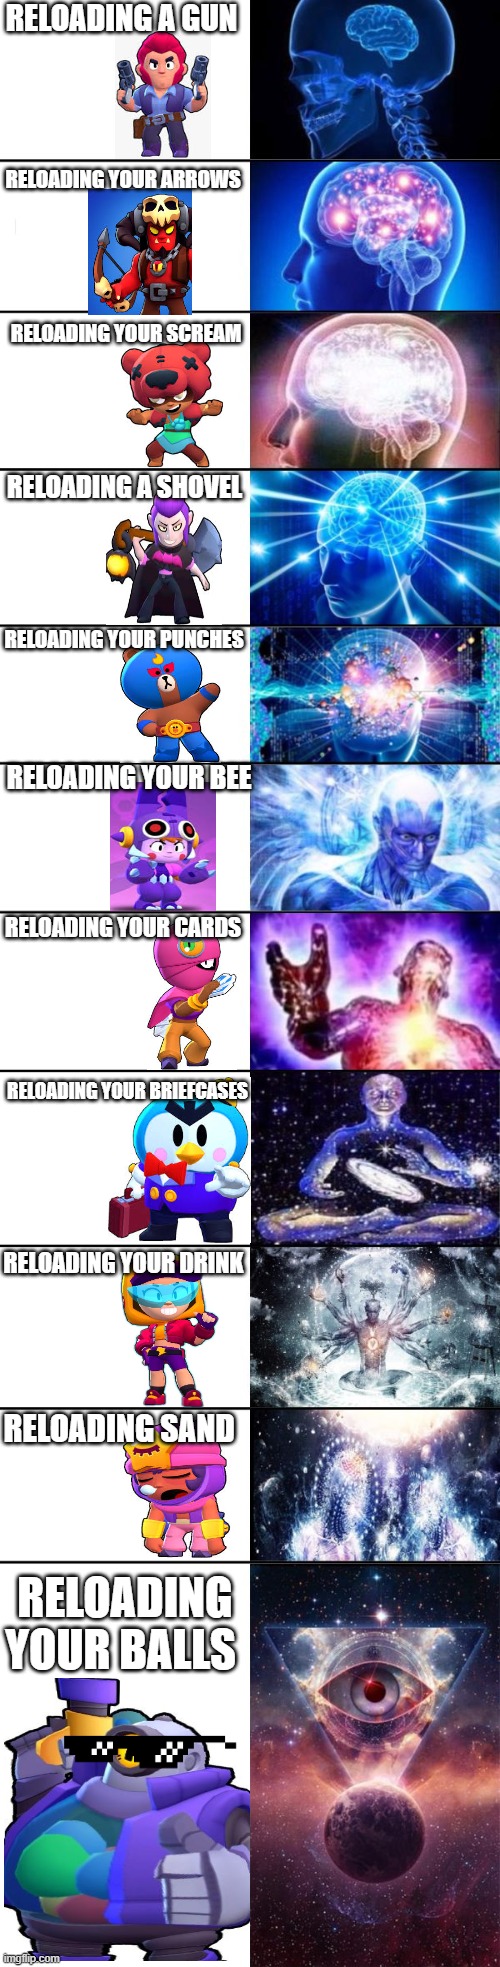 Brawl Stars Meme #24 this took hours to make bc i needed to download the pictures | RELOADING A GUN; RELOADING YOUR ARROWS; RELOADING YOUR SCREAM; RELOADING A SHOVEL; RELOADING YOUR PUNCHES; RELOADING YOUR BEE; RELOADING YOUR CARDS; RELOADING YOUR BRIEFCASES; RELOADING YOUR DRINK; RELOADING SAND; RELOADING YOUR BALLS | image tagged in extended expanding brain | made w/ Imgflip meme maker